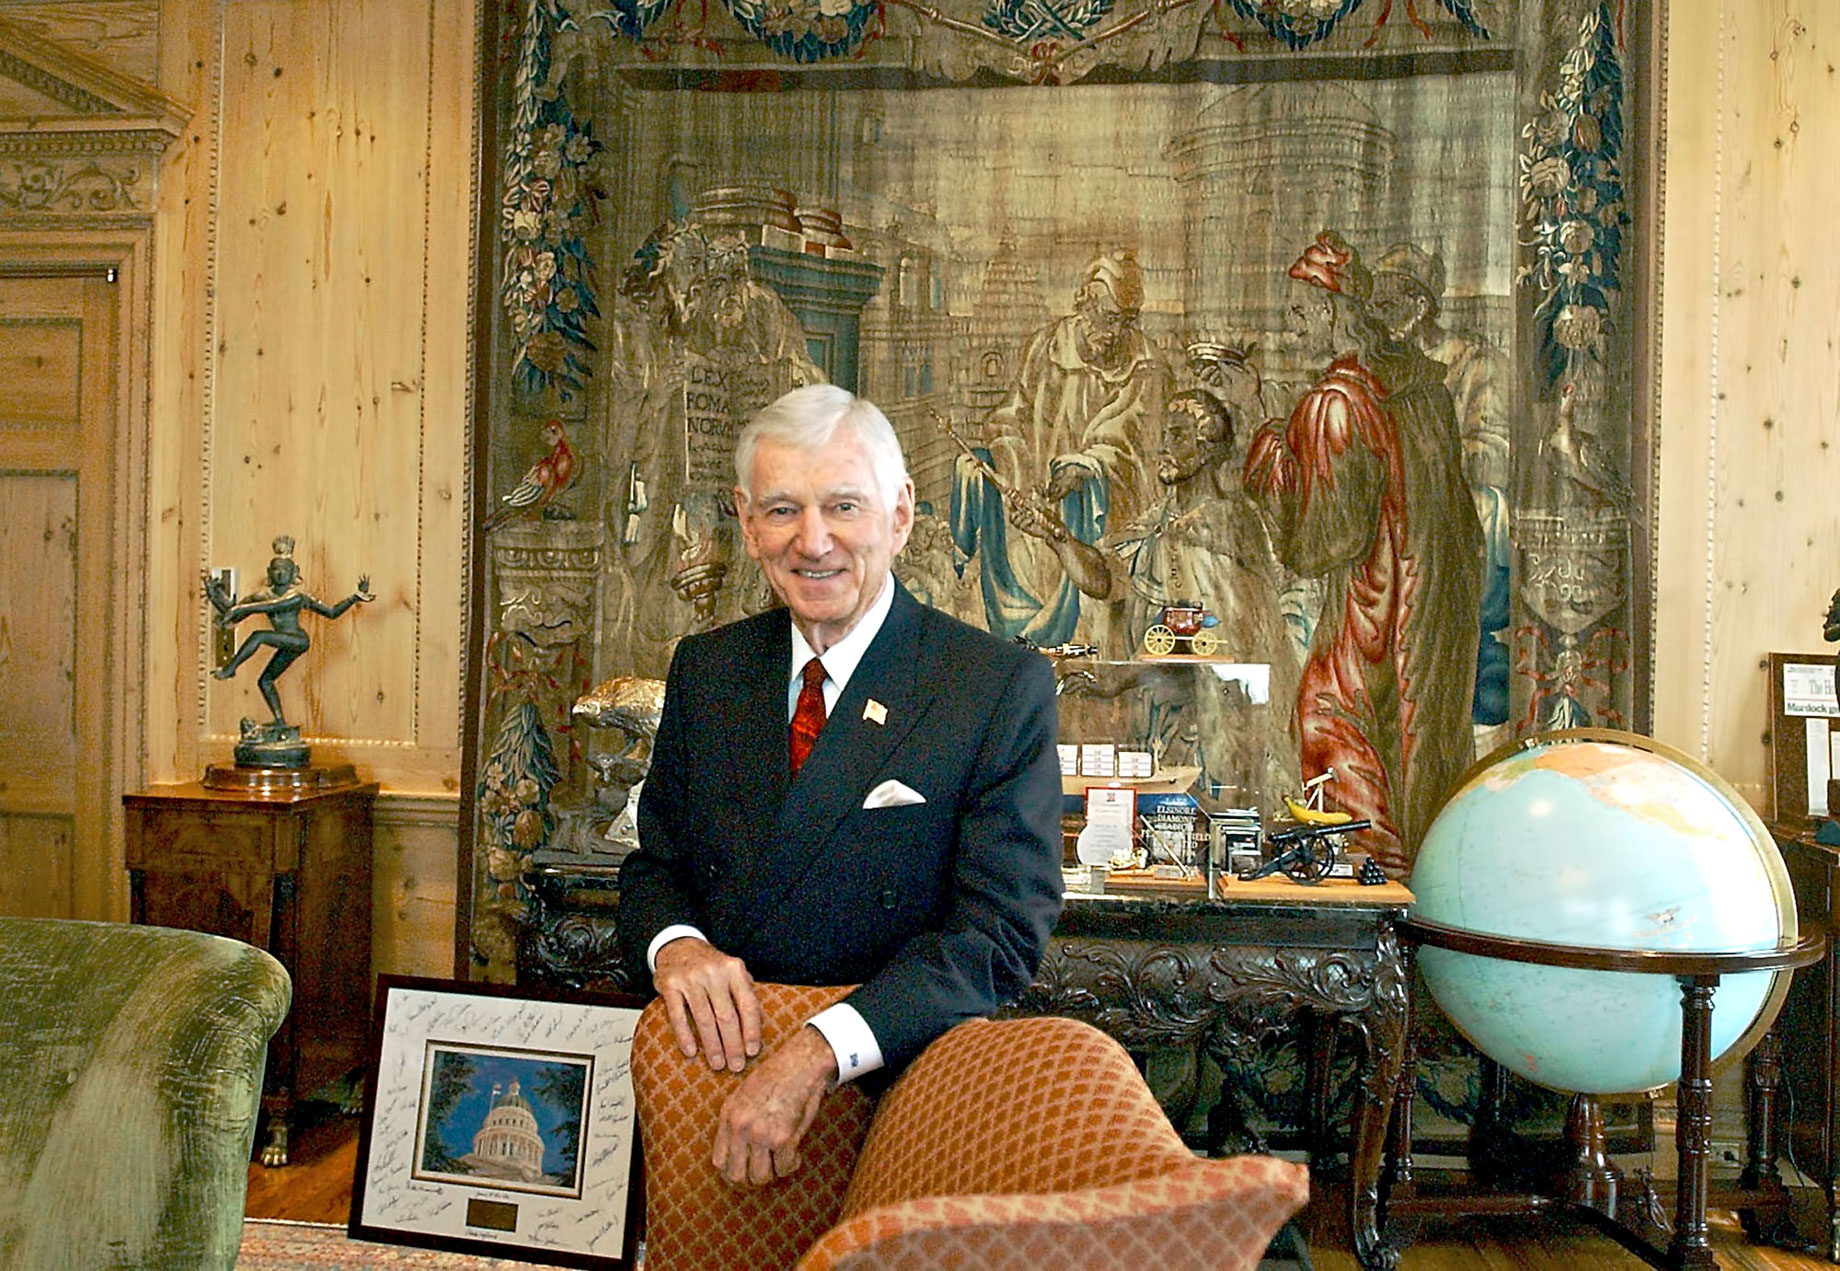 David H. Murdock Billionaire CEO of Castle and Cooke – Lanai – The Most Expensive Private Island Real Estate Transaction in History